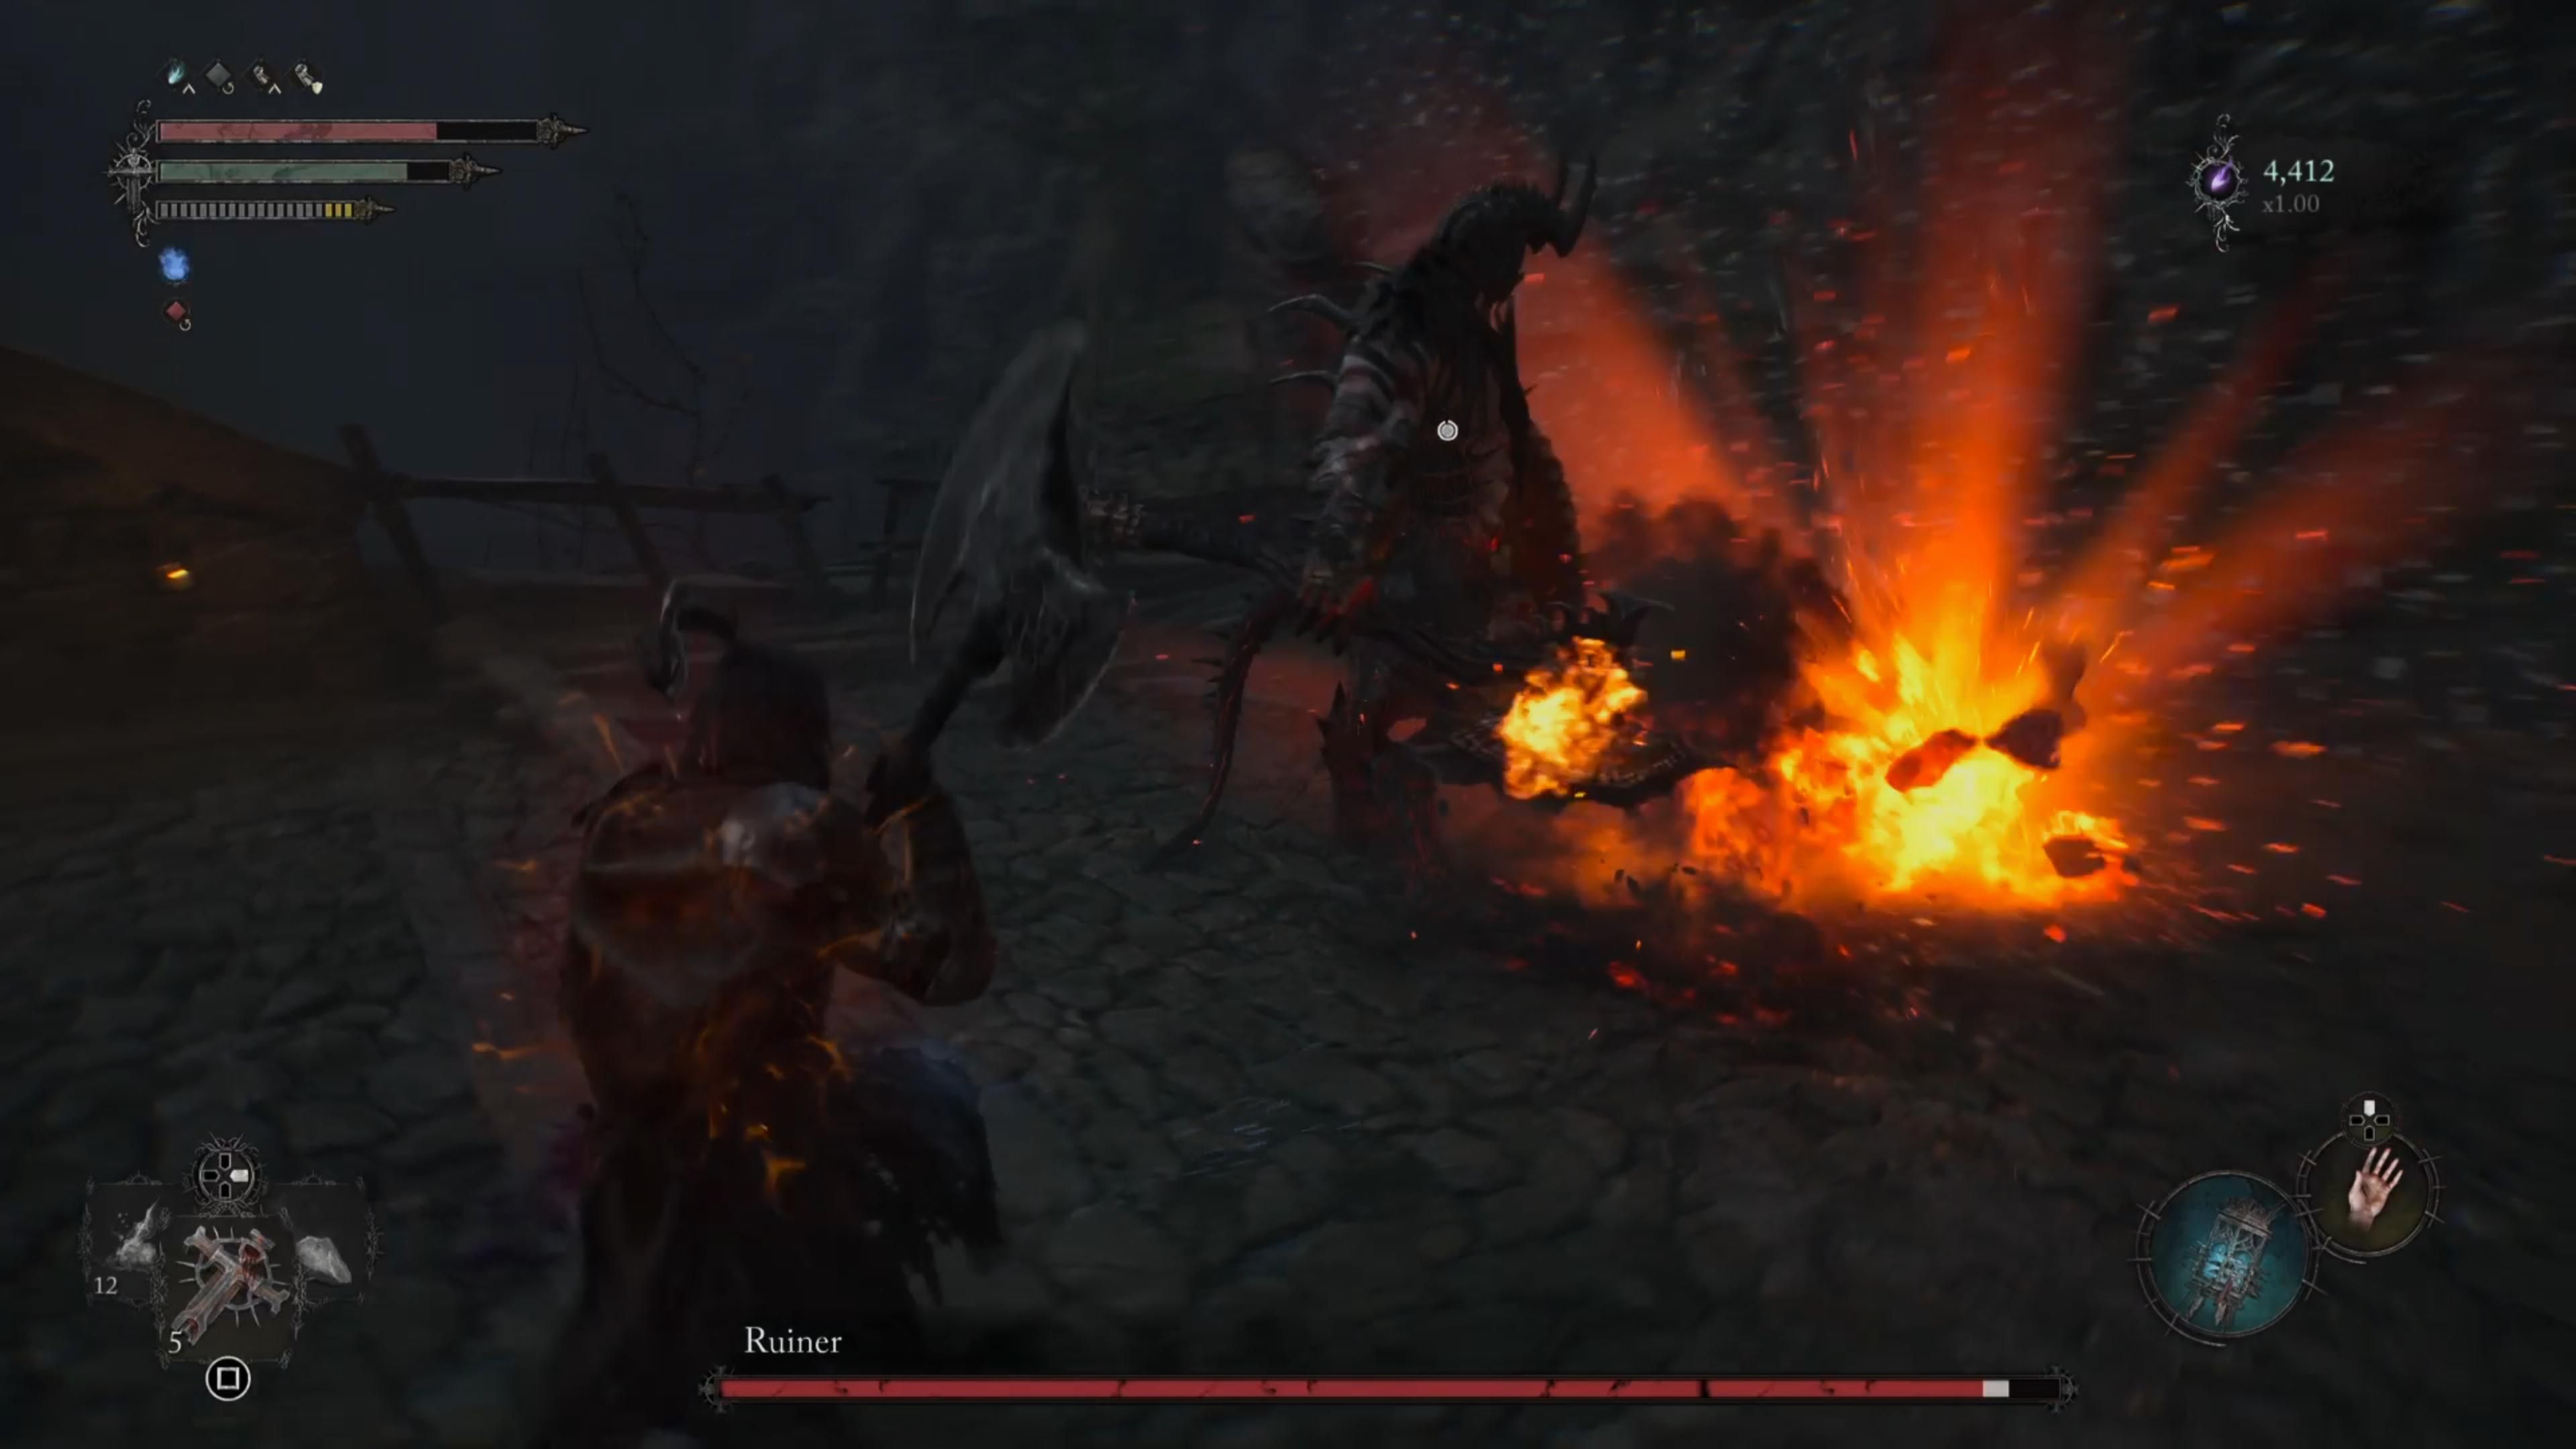 Ruiner boss spewing lava after foot attack in Lords of the Fallen